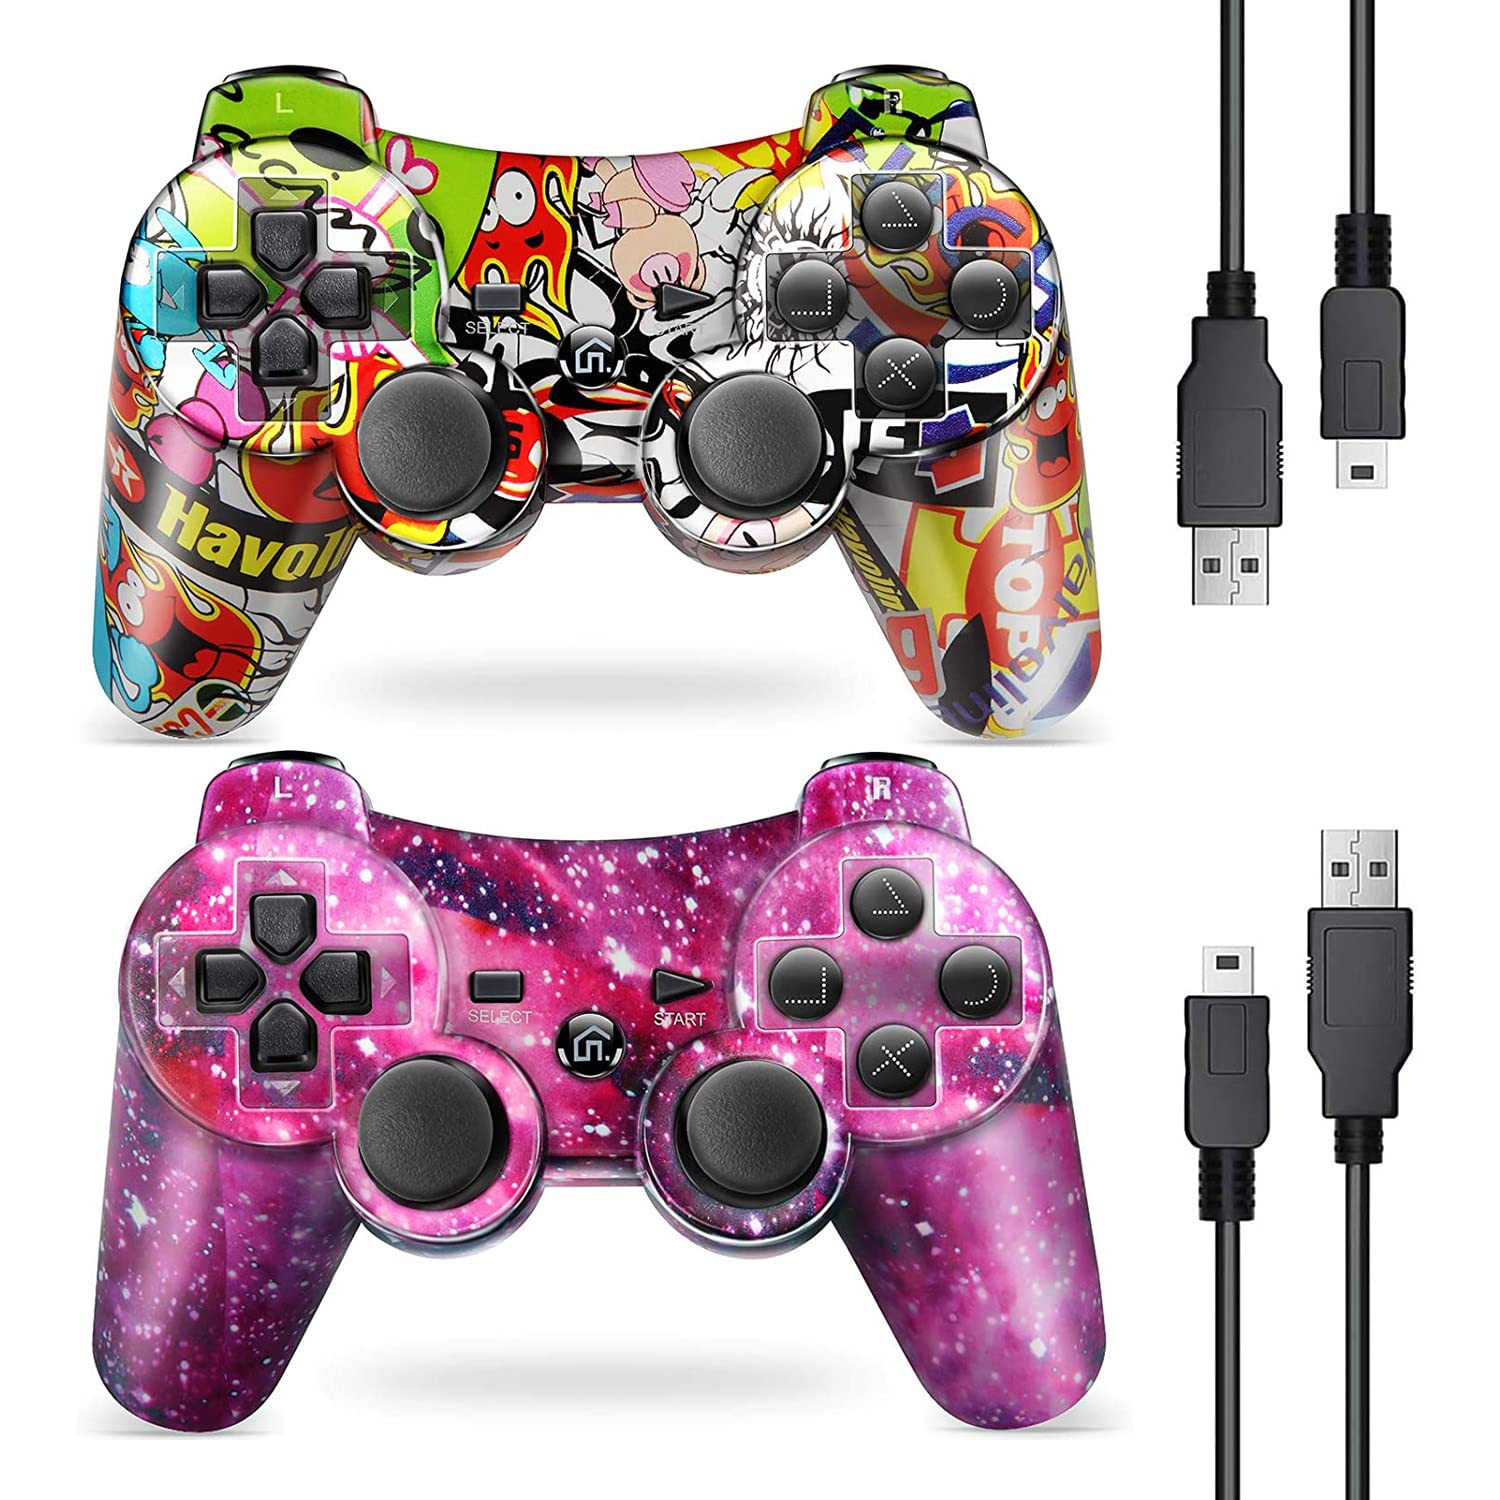 Puning Wireless Controller for PS3 Controller, Wireless Controller with Upgraded Joystick(Sky and Art)